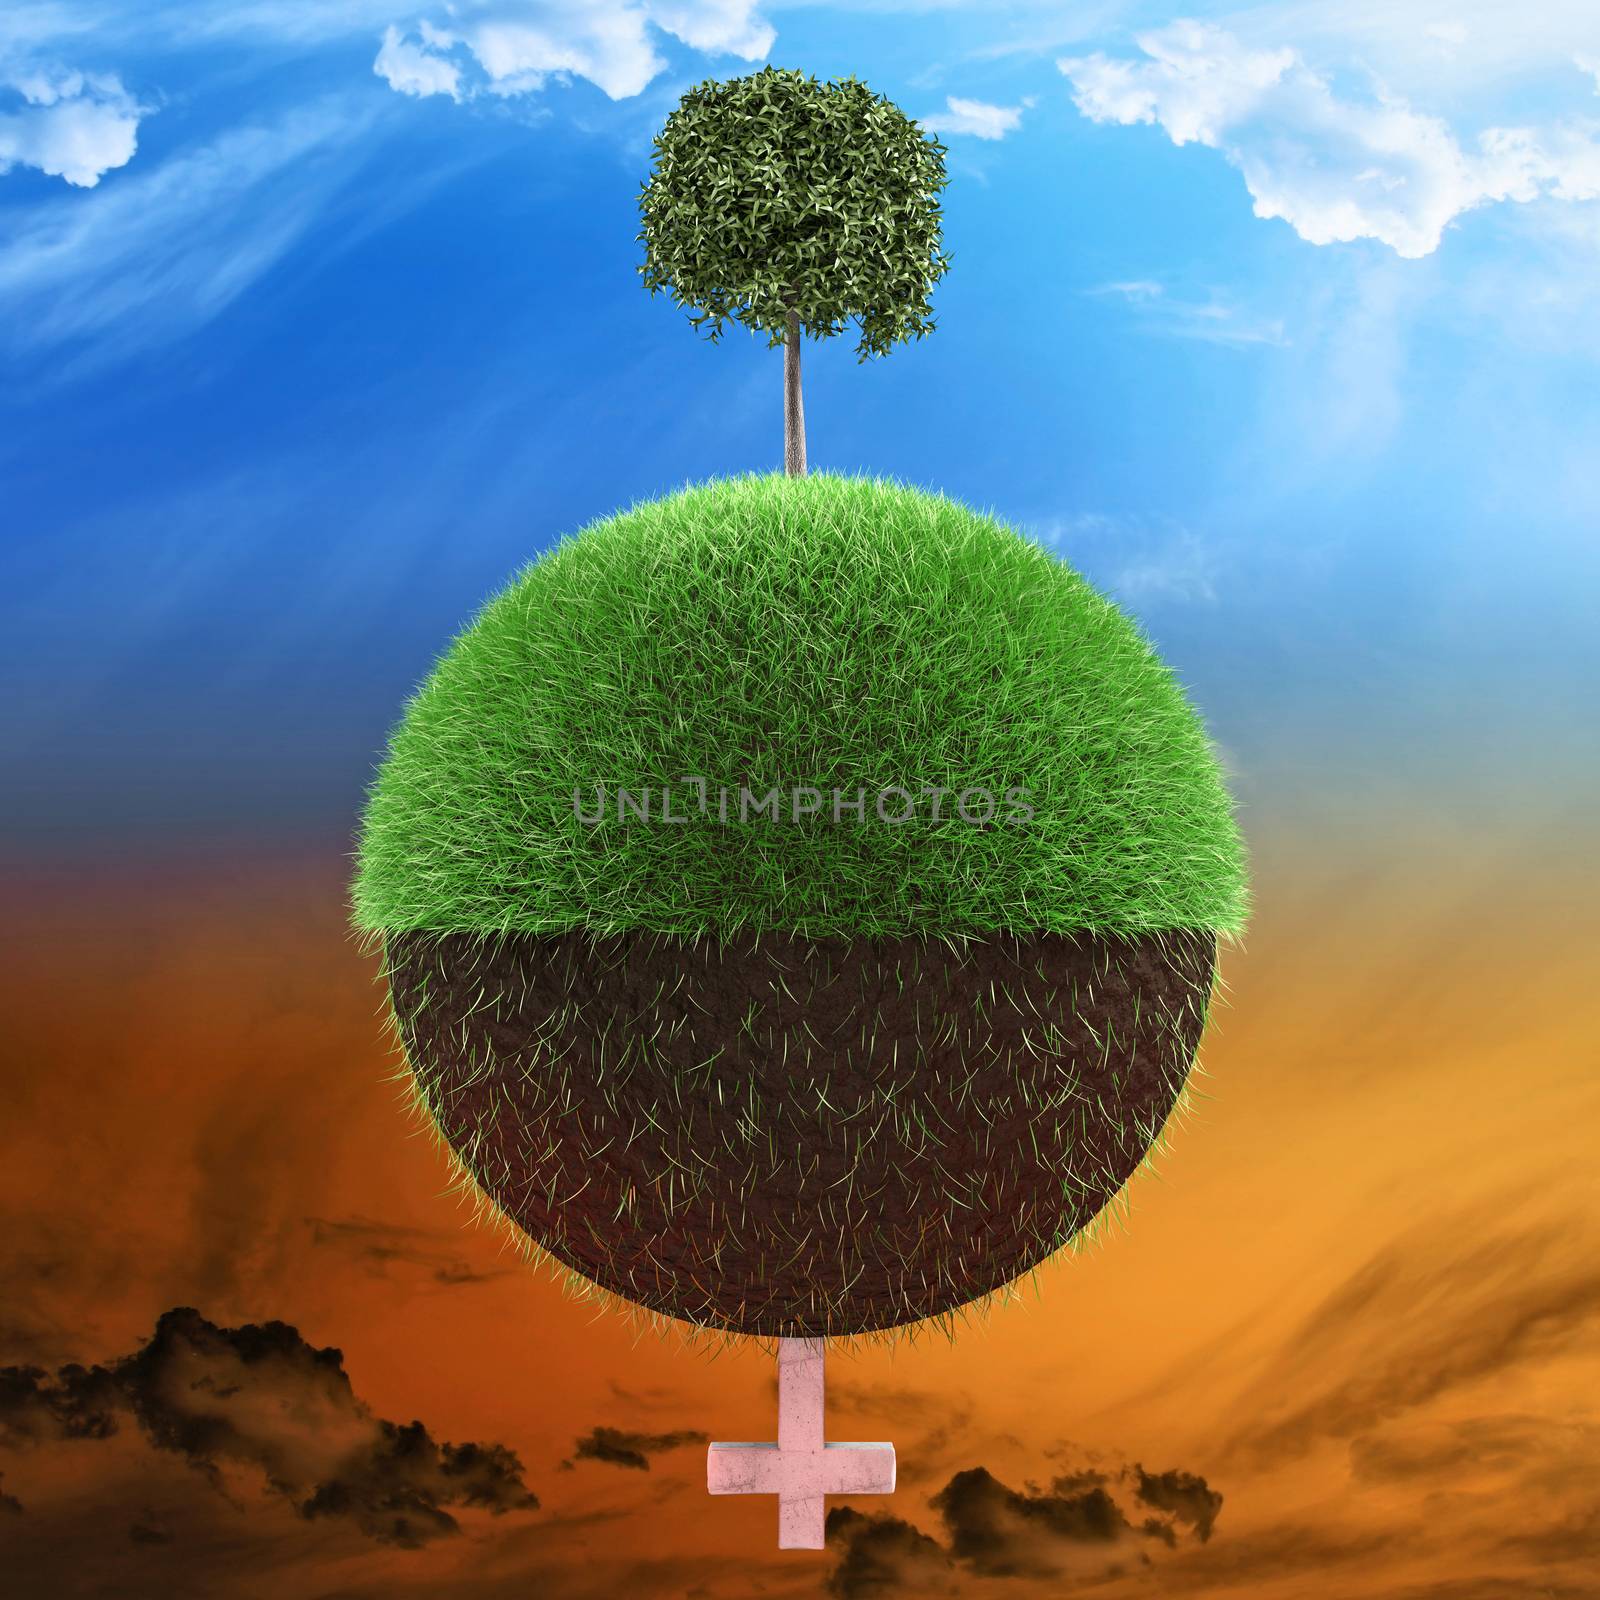 Planet illustrated with one half with healthy tree and other half with less grass and a tombstone 3d illustration